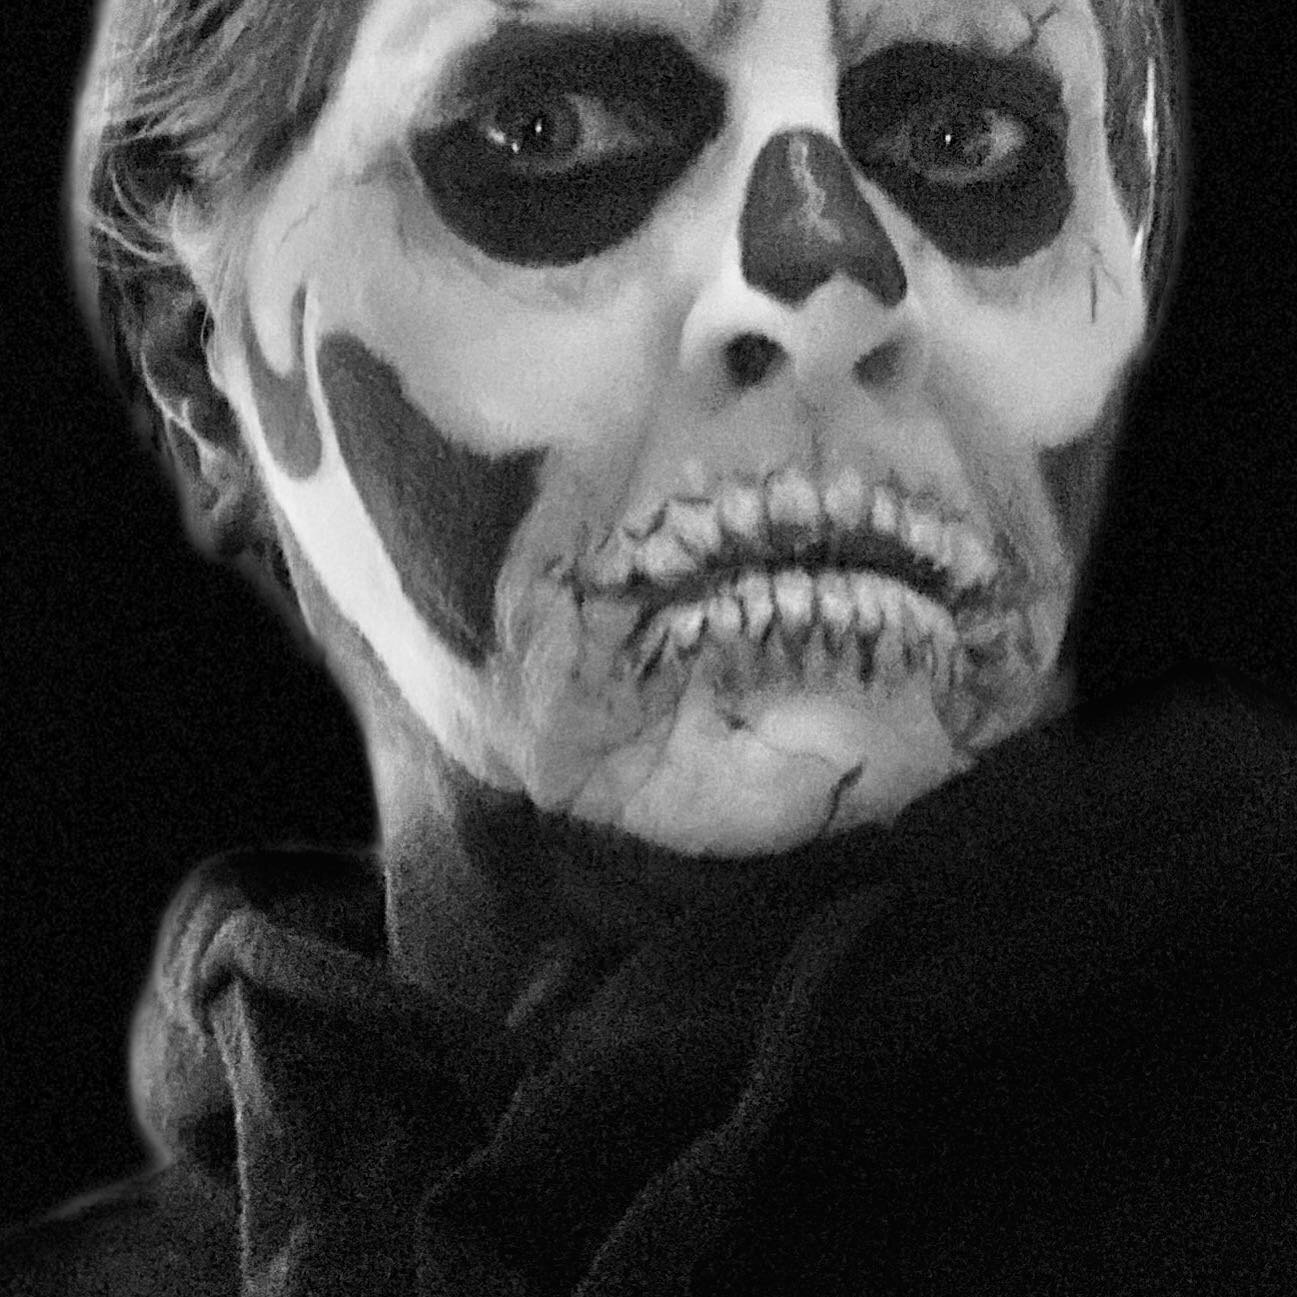 #skullfacepaint #symmetry #shading #practicemakesprogress @mehronmakeup #blackandwhite I have always been fascinated by skulls. I find creating them to be an excellent exercise in technique,symmetry, time management, color theory, shadows, shading, a